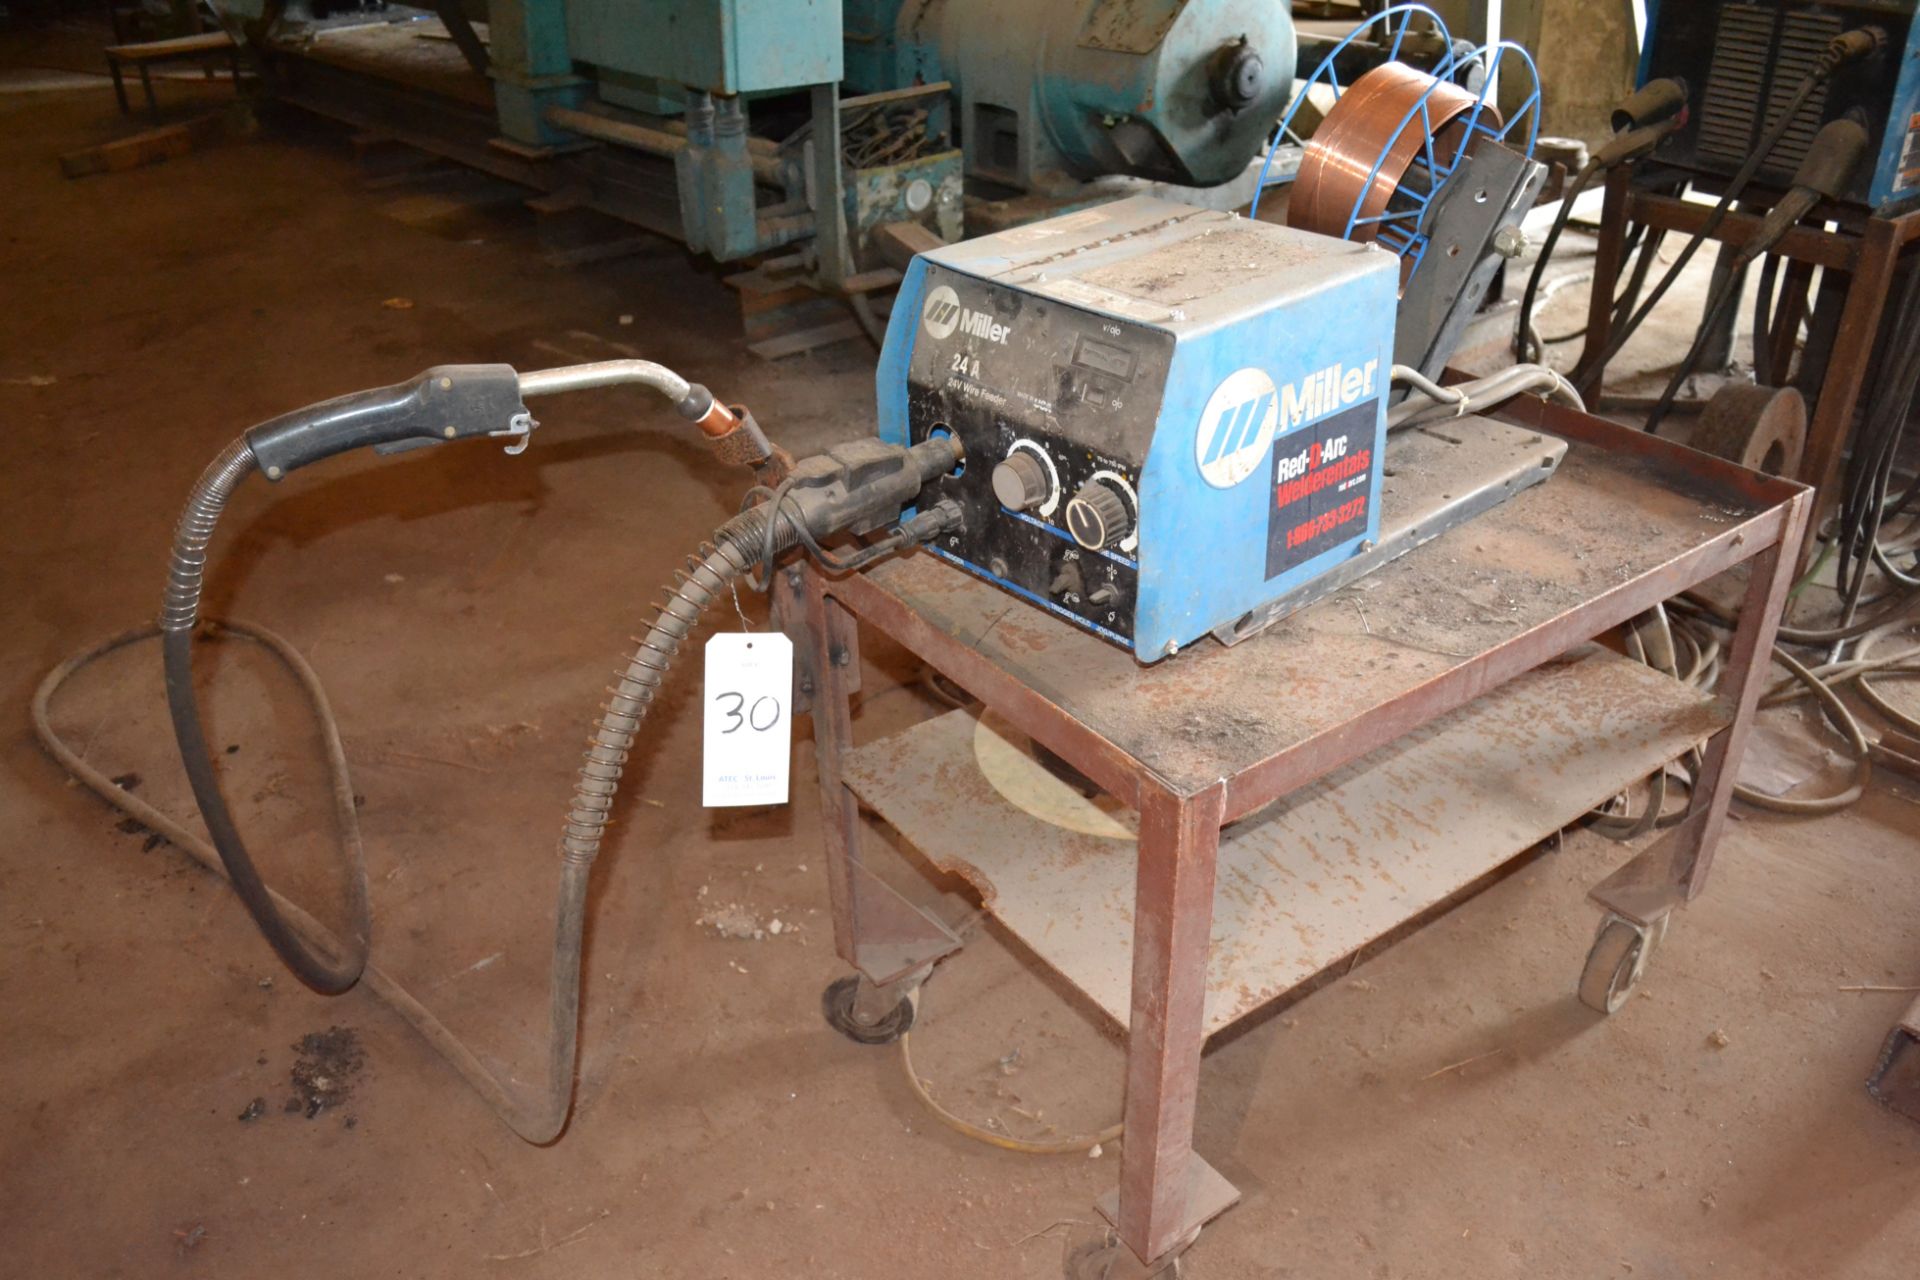 Miller Model XMT456 CC/CV DC Inverter Arc Welder, S/N LJ441020A; With 24A Wire Feed - Image 6 of 8